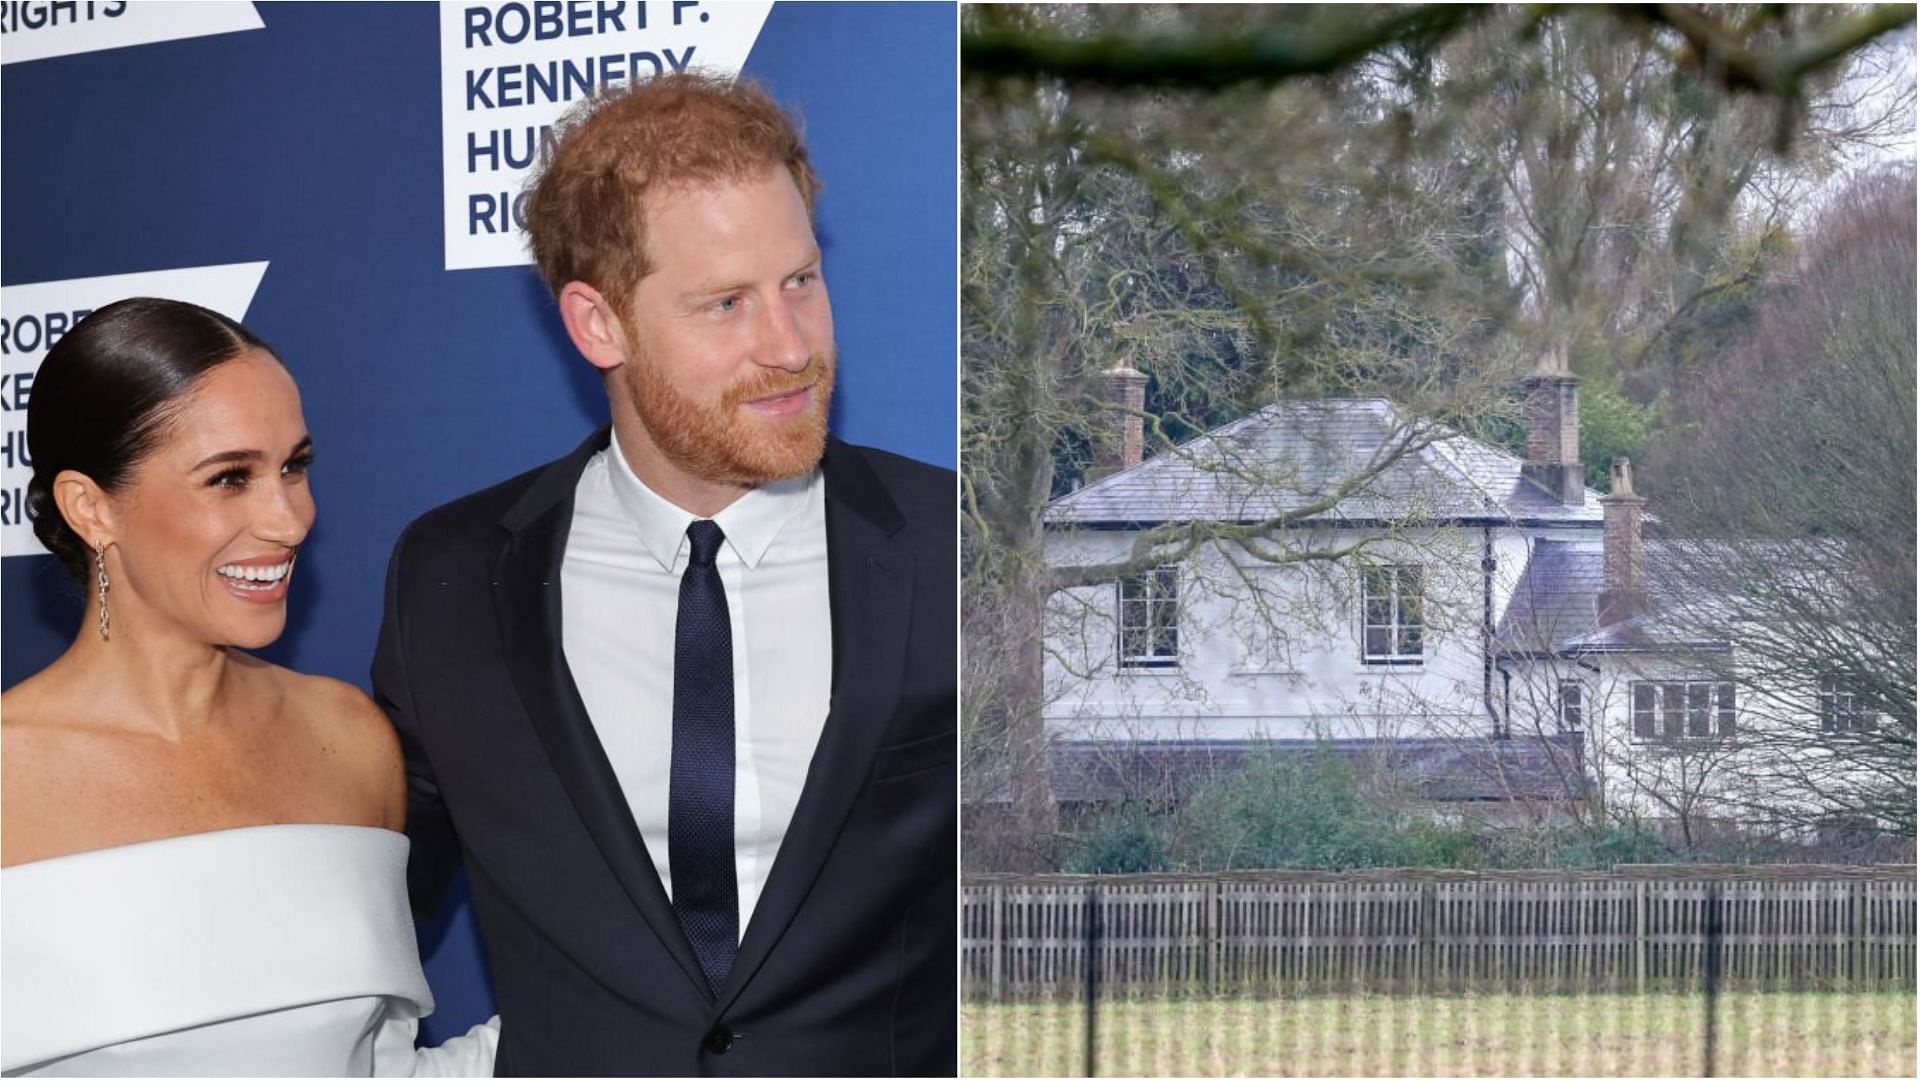 Prince Harry and Meghan Markle are being reportedly evicted from Frogmore Cottage (Images via Mike Coppola and Steve Parsons/Getty Images)